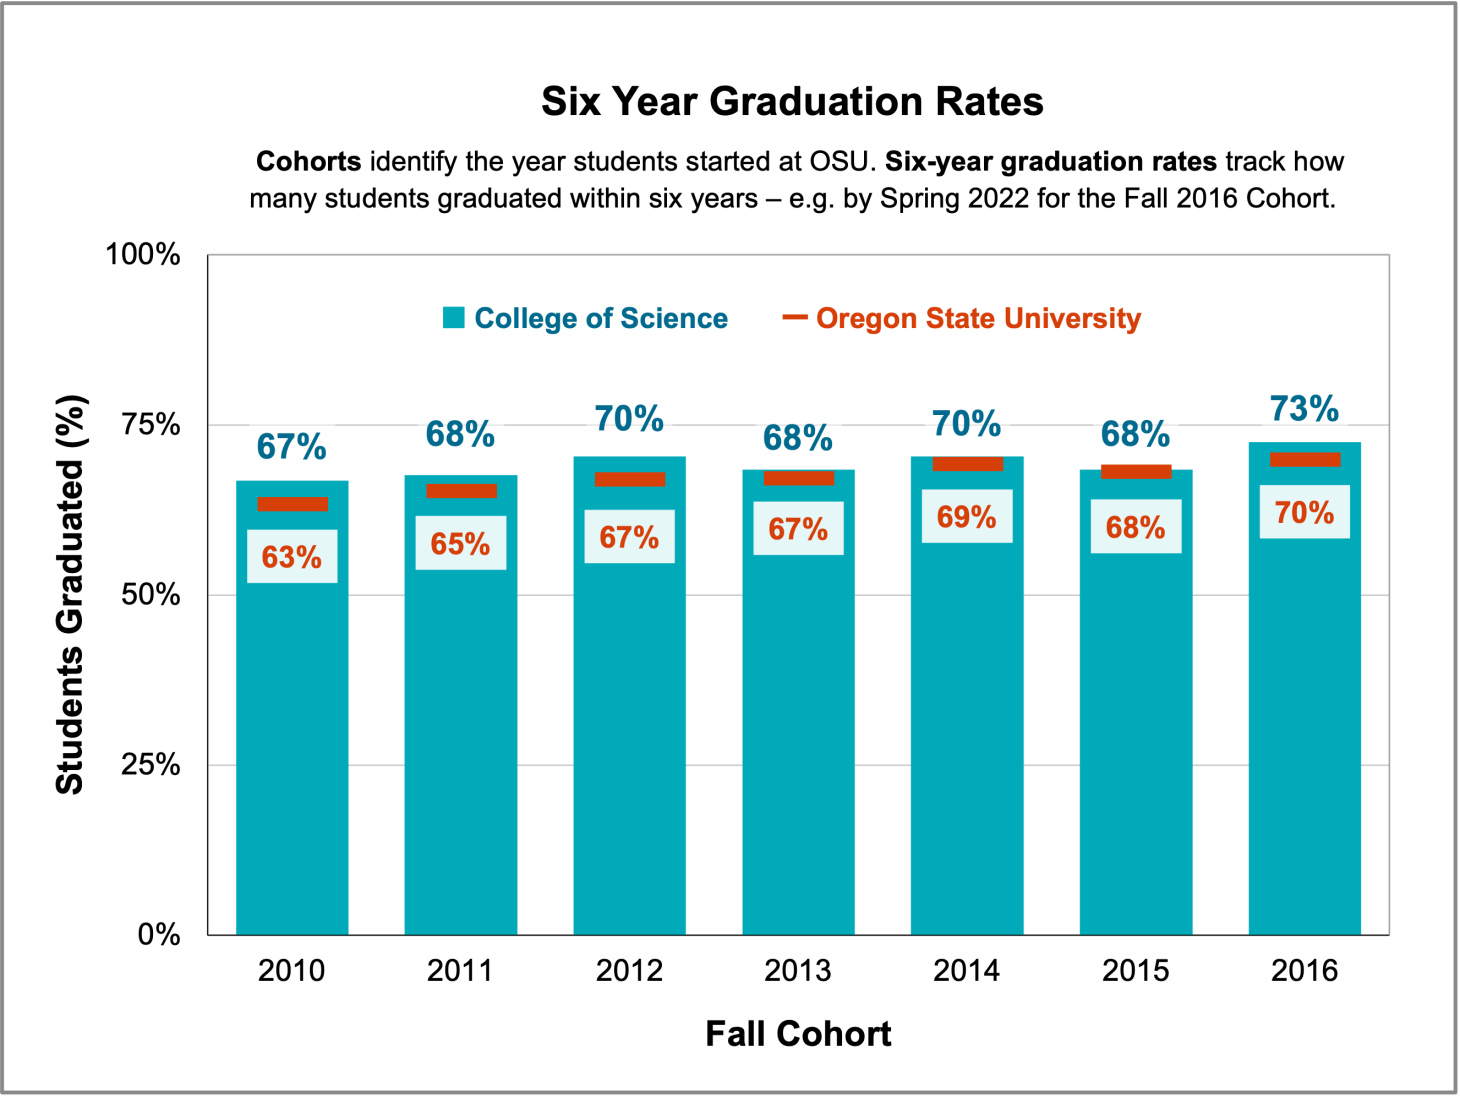 Graph showing the percent of students over the last seven years who graduated within six years in the College of Science and at Oregon State University. More details are available below, under Chart 3.3.1 Six Year Graduation Rates